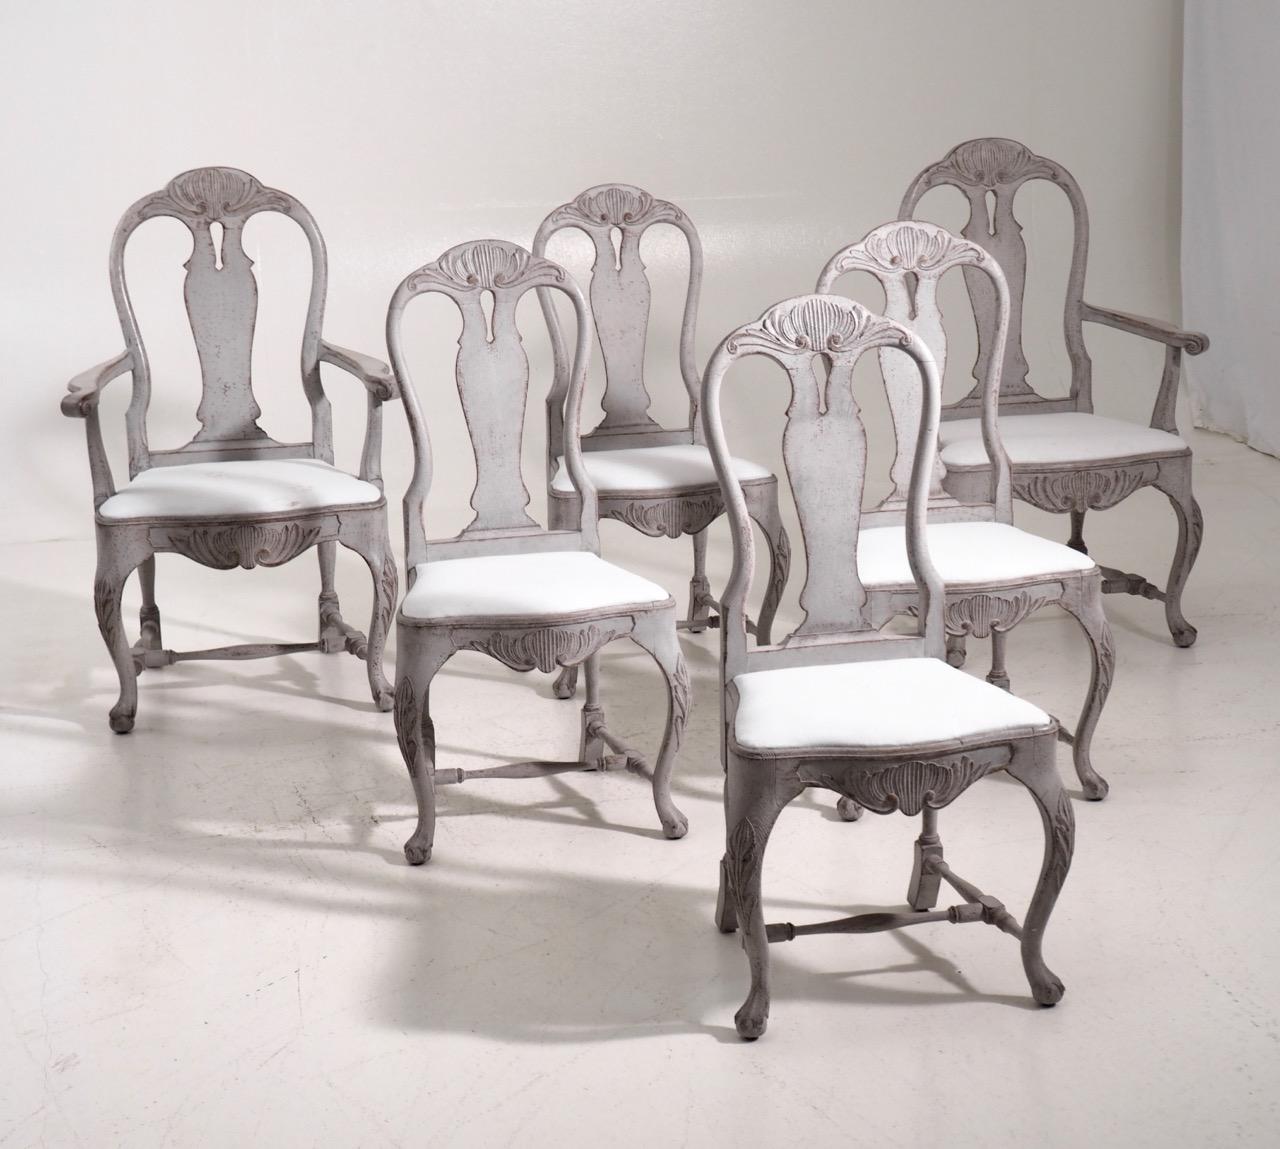 Fine set of six Swedish Rococo style chairs, including two armchairs, richly carved, circa 100 years old.

Measures: Armchairs:
H. 111 H-seat. 47 W. 70 D. 52 cm
H. 43.7 H-seat. 18.5 W. 27.5 D. 20.4 in
Chairs:
H. 105 H-seat. 46 W. 52 D. 43